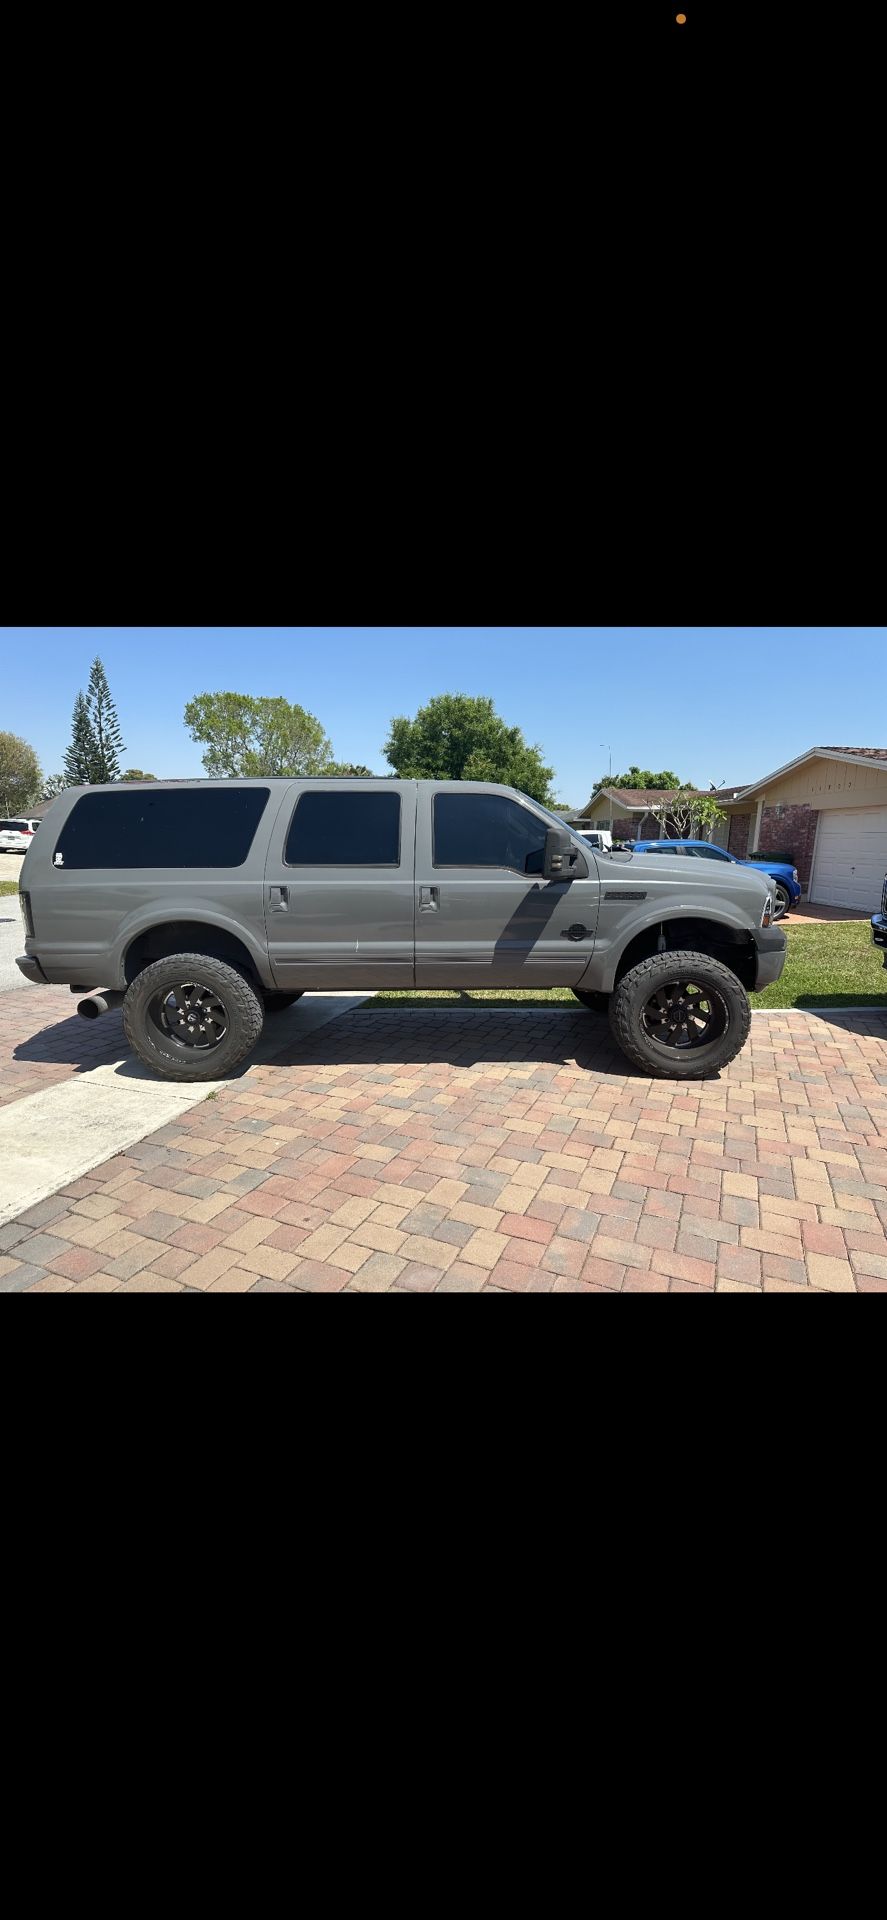 Excursion 6.0 diesel lifted